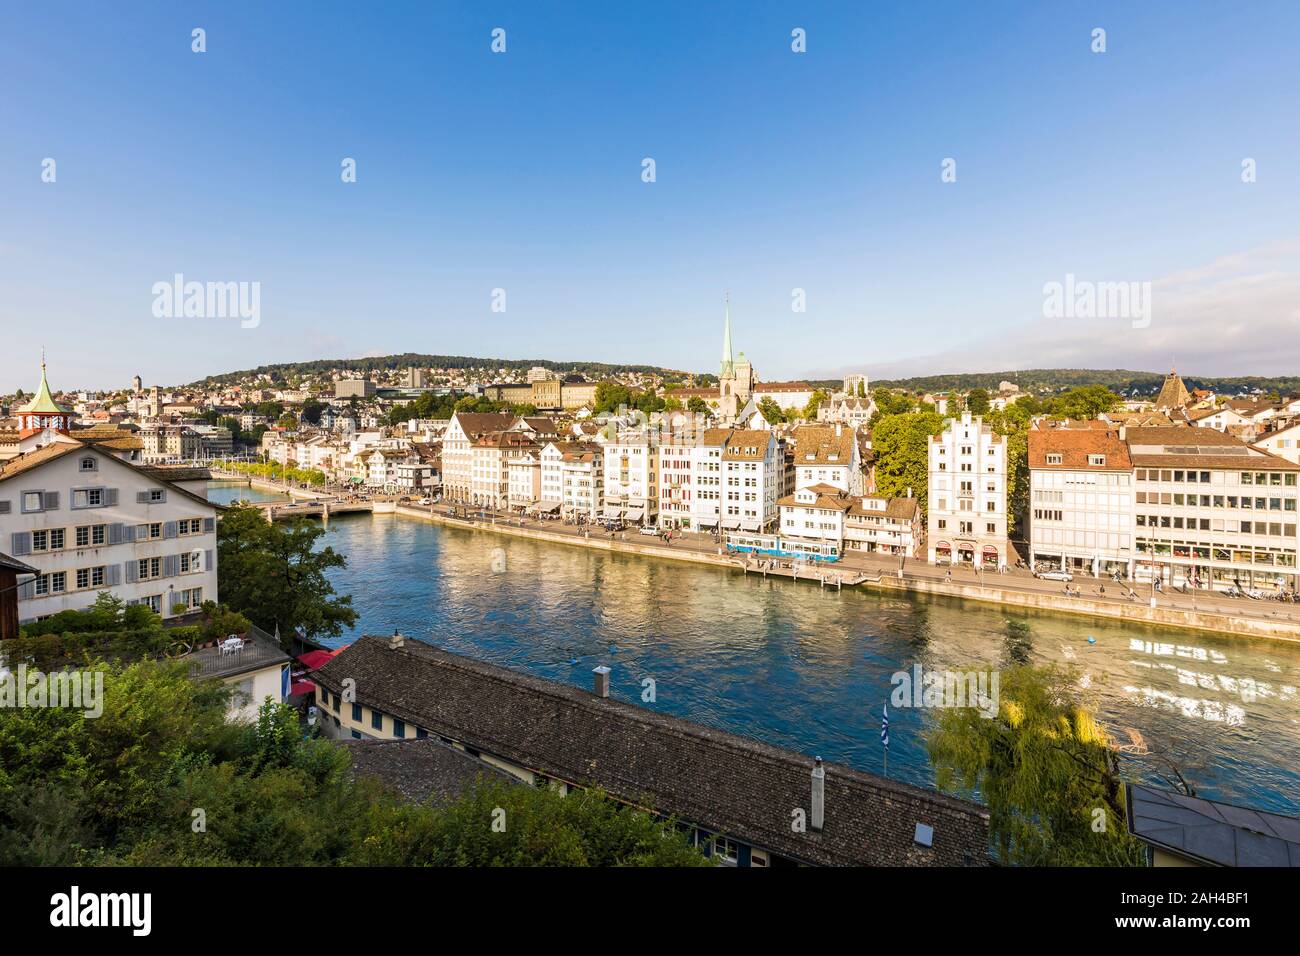 Switzerland, Canton of Zurich, Zurich, River Limmat and old town buildings along Limmatquai street Stock Photo